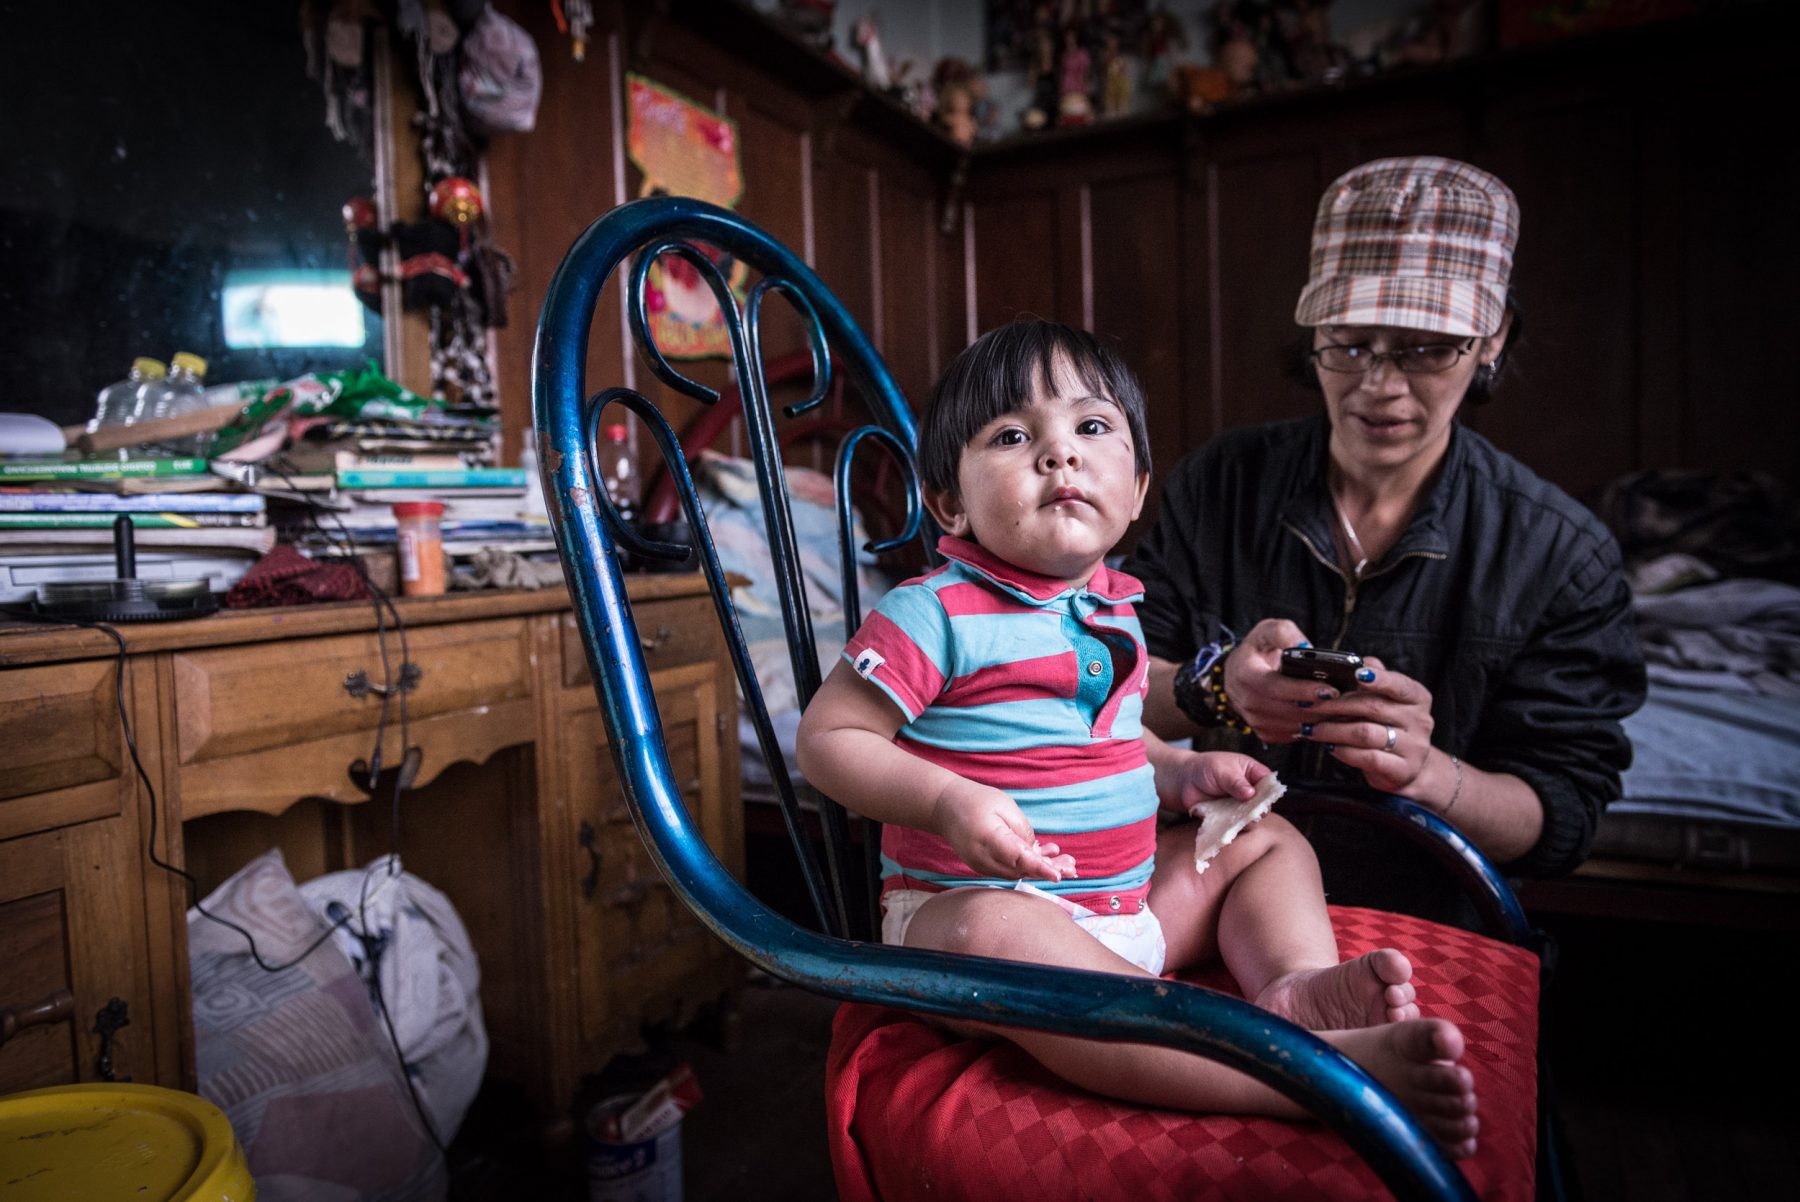 The house is not limited only to trans persons but open to everyone who does not have a stable income. Angelica lives in the house with her two children and one grandchild. She makes her living by selling coffee and juice in the streets, and is currently pursuing her high school graduation.